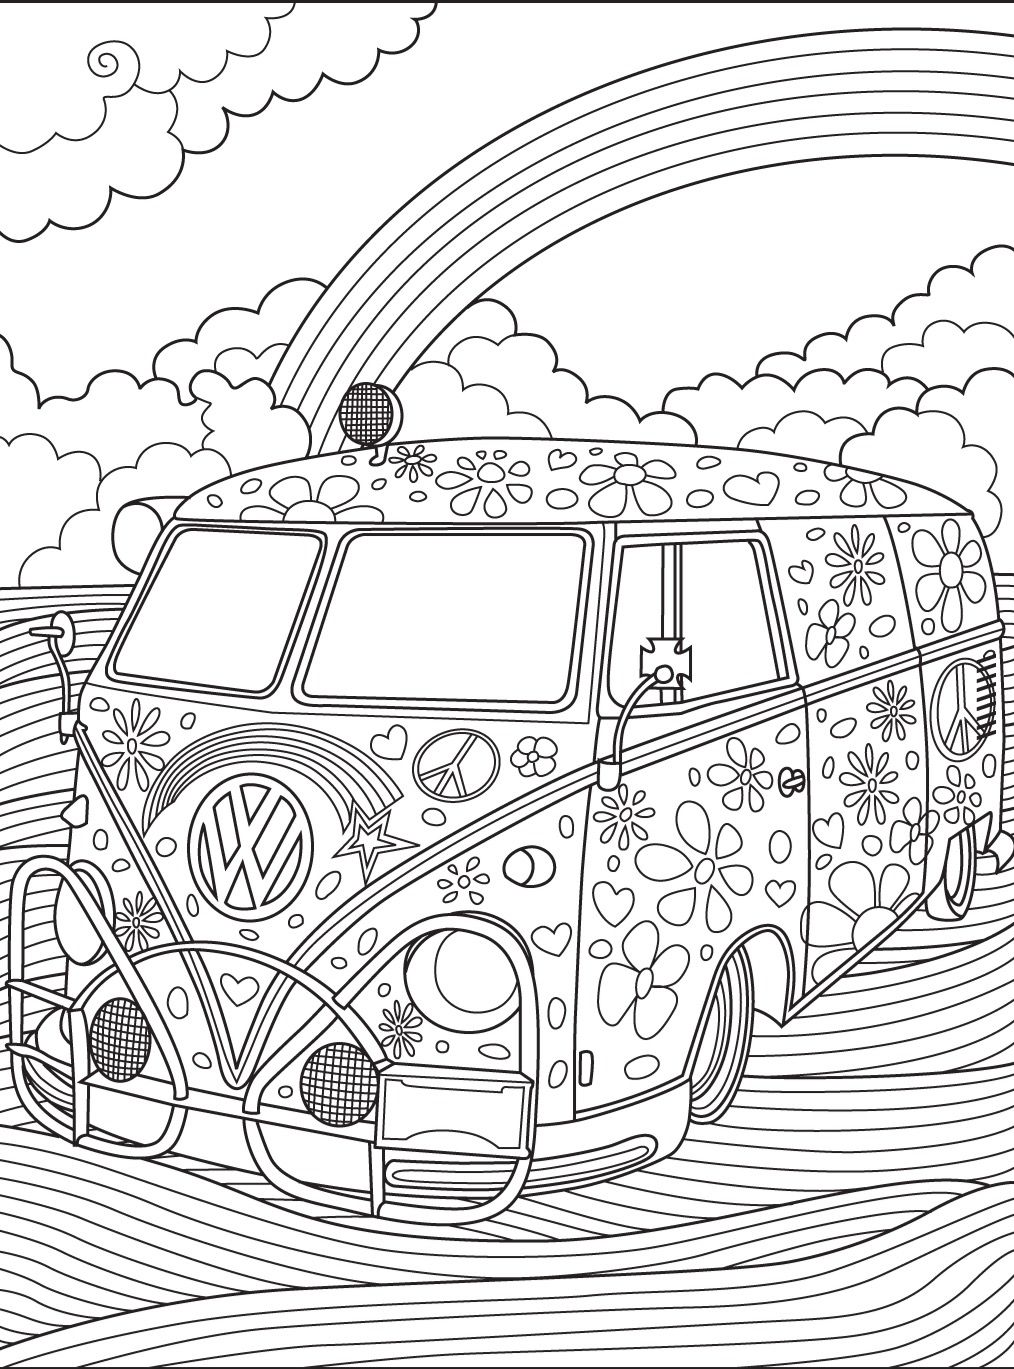 VW Kombi #coloringpage | Colorish: coloring book for adults by ...